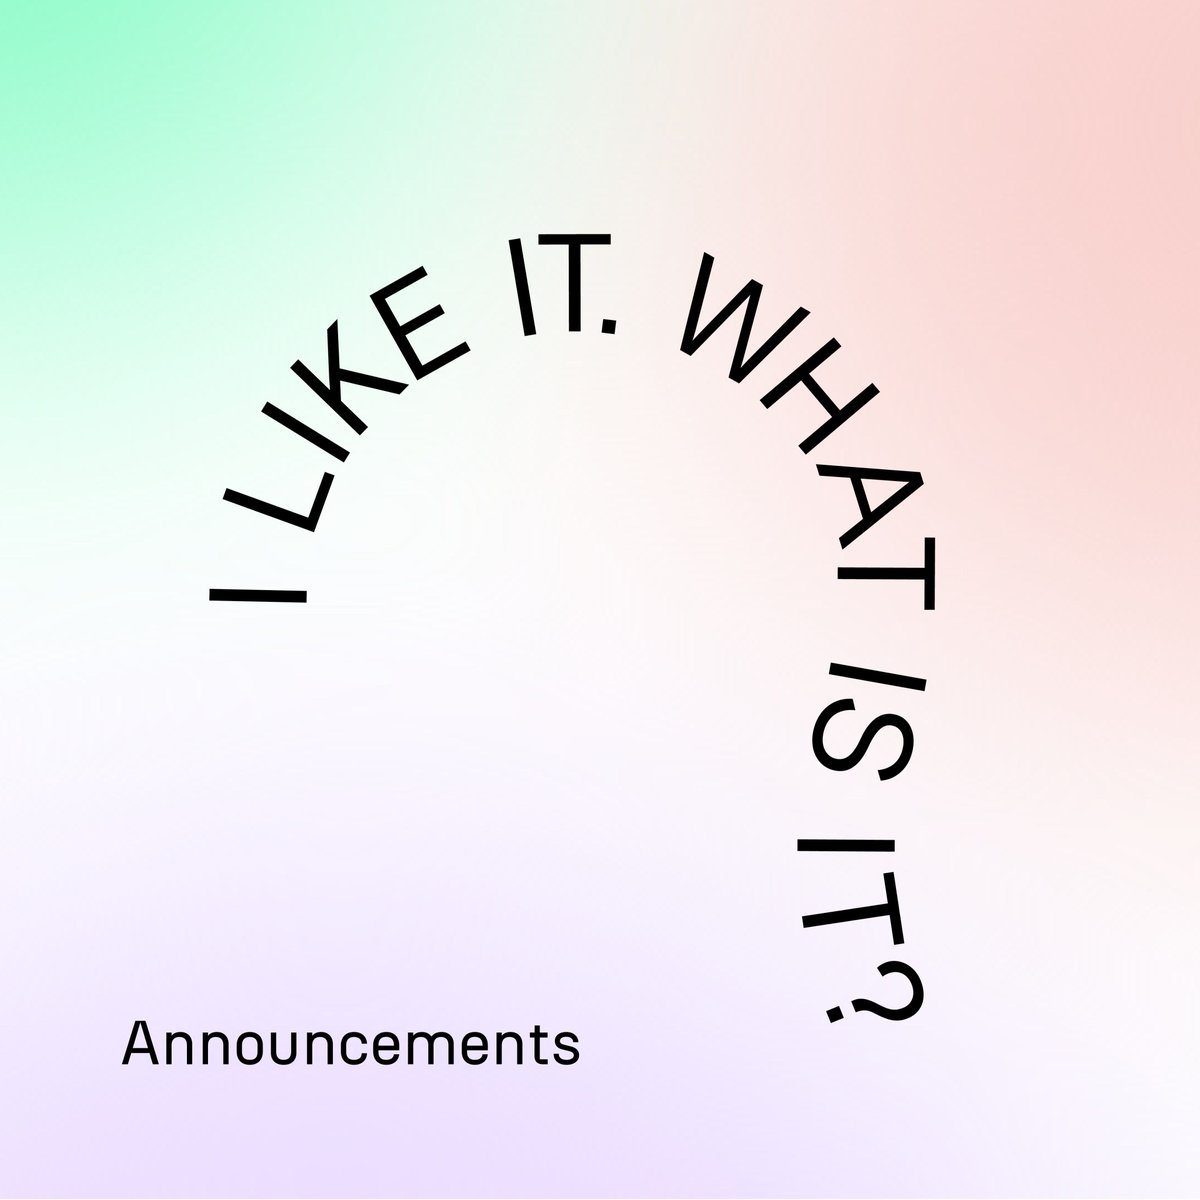 With support from Jerwood Arts, we’re thrilled to be announcing our I Like It. What is It? residents over this week, starting tomorrow. Each day we’ll be sharing words, images and/or videos from the artists that announce their residency in their own way. 📣📣📣